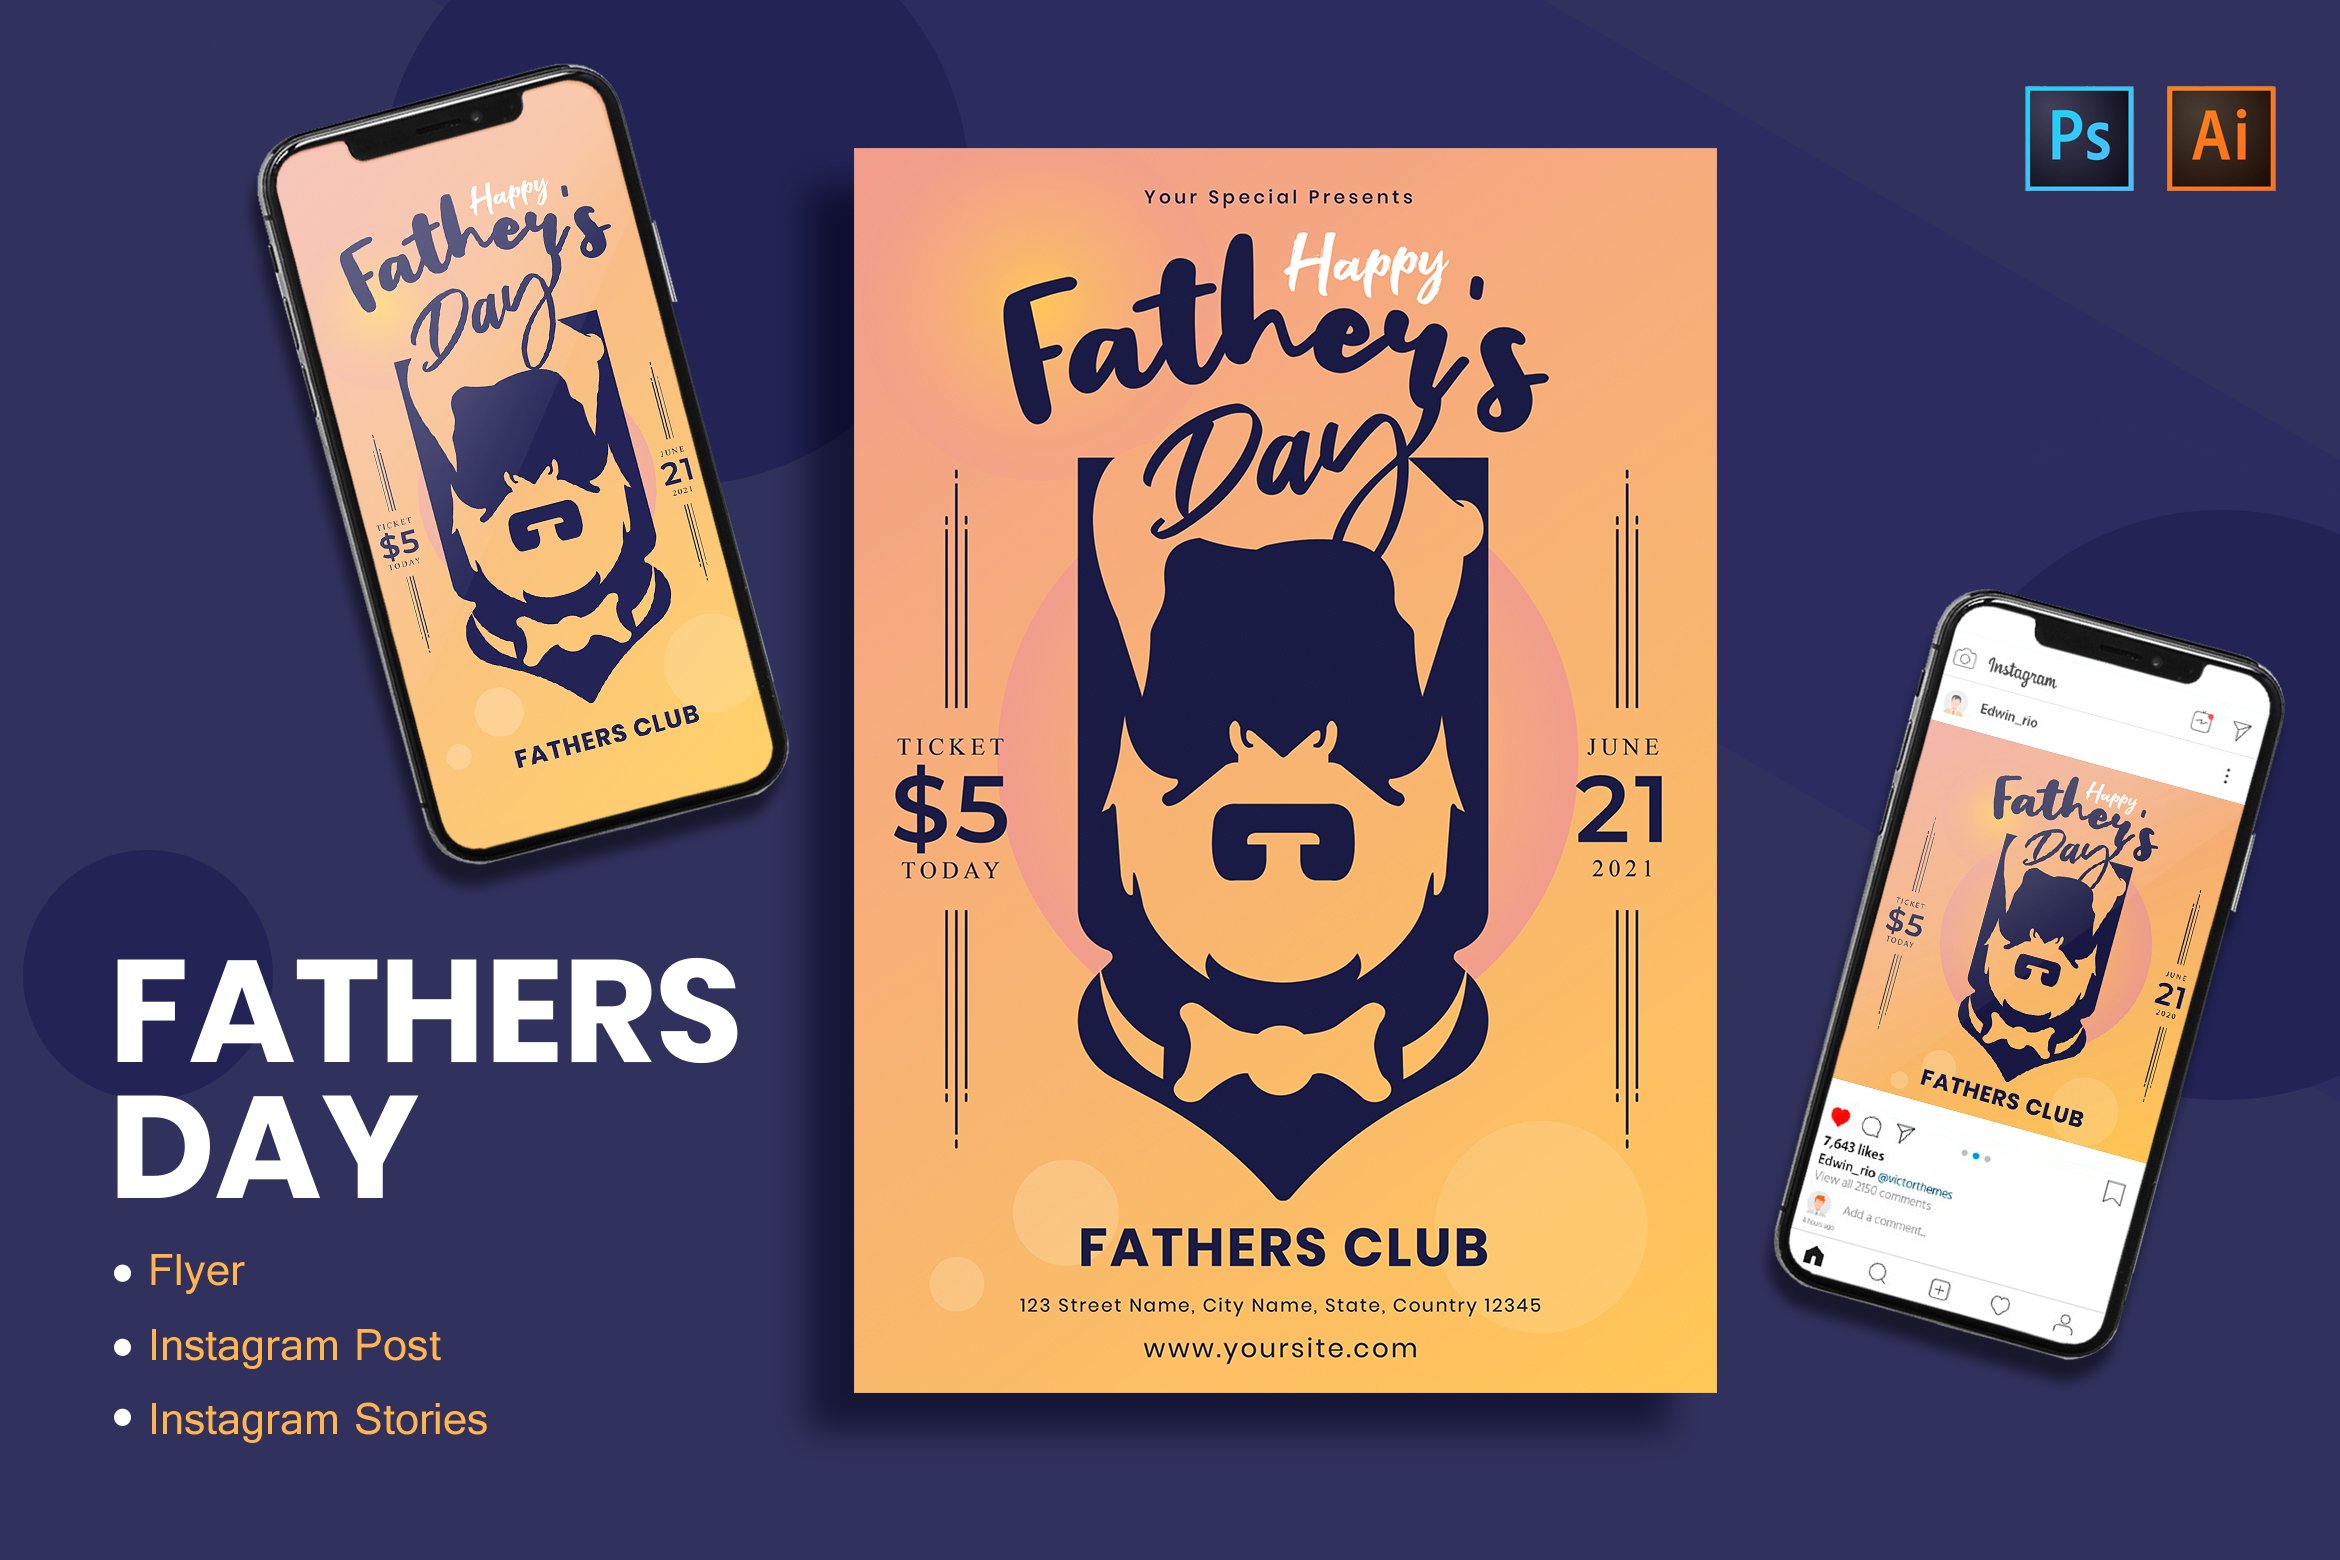 Fathers Day Flyer, Instagram Post & Stories